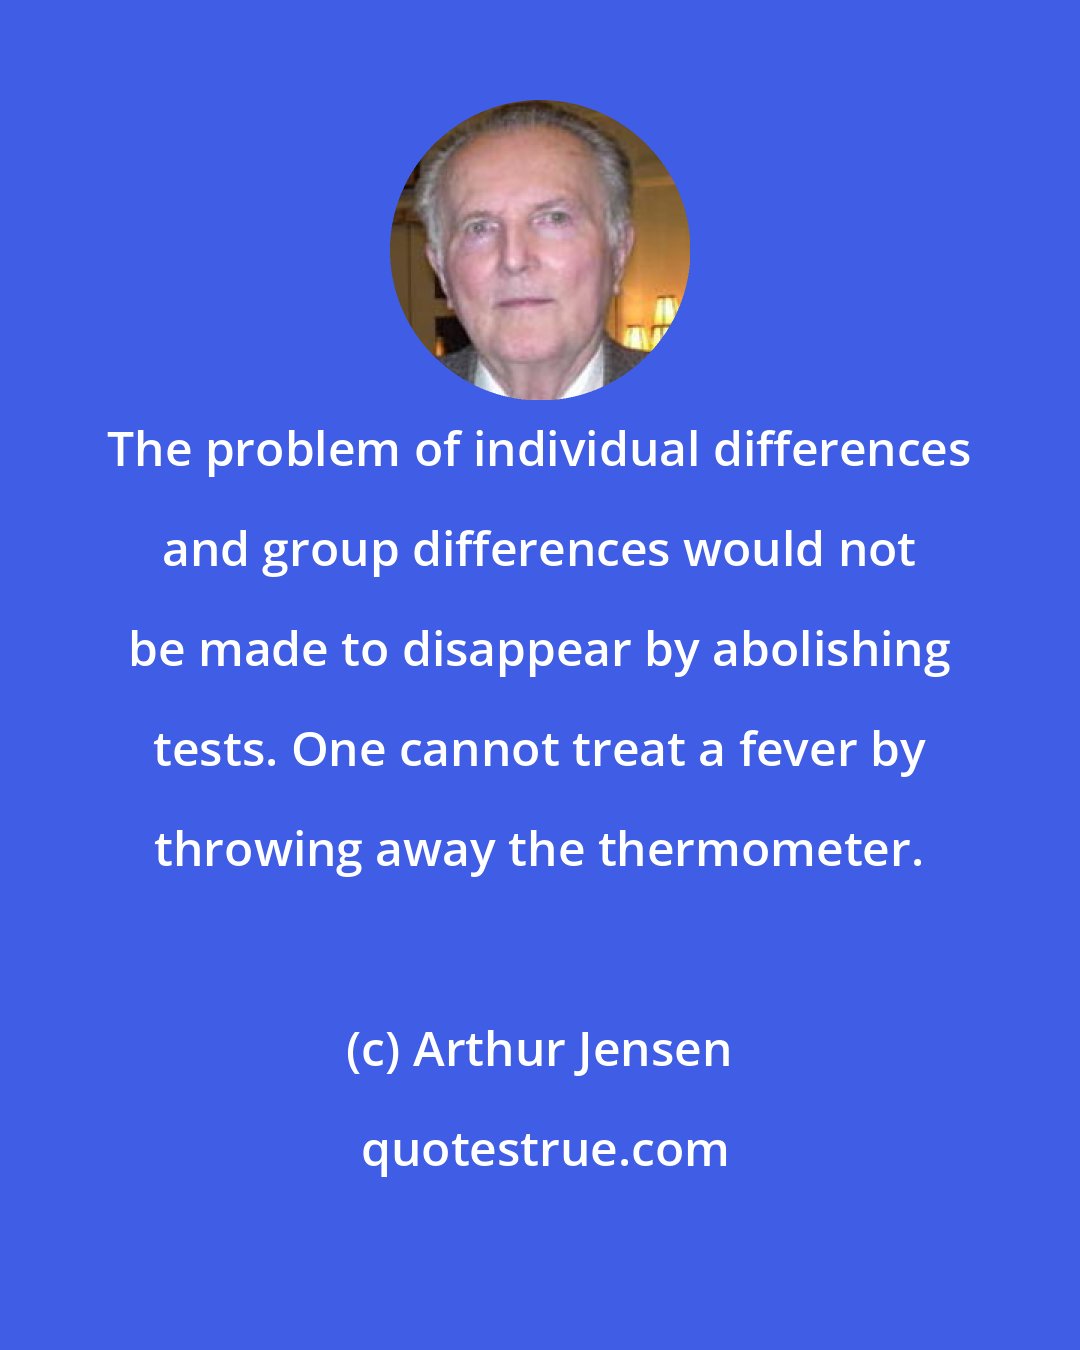 Arthur Jensen: The problem of individual differences and group differences would not be made to disappear by abolishing tests. One cannot treat a fever by throwing away the thermometer.